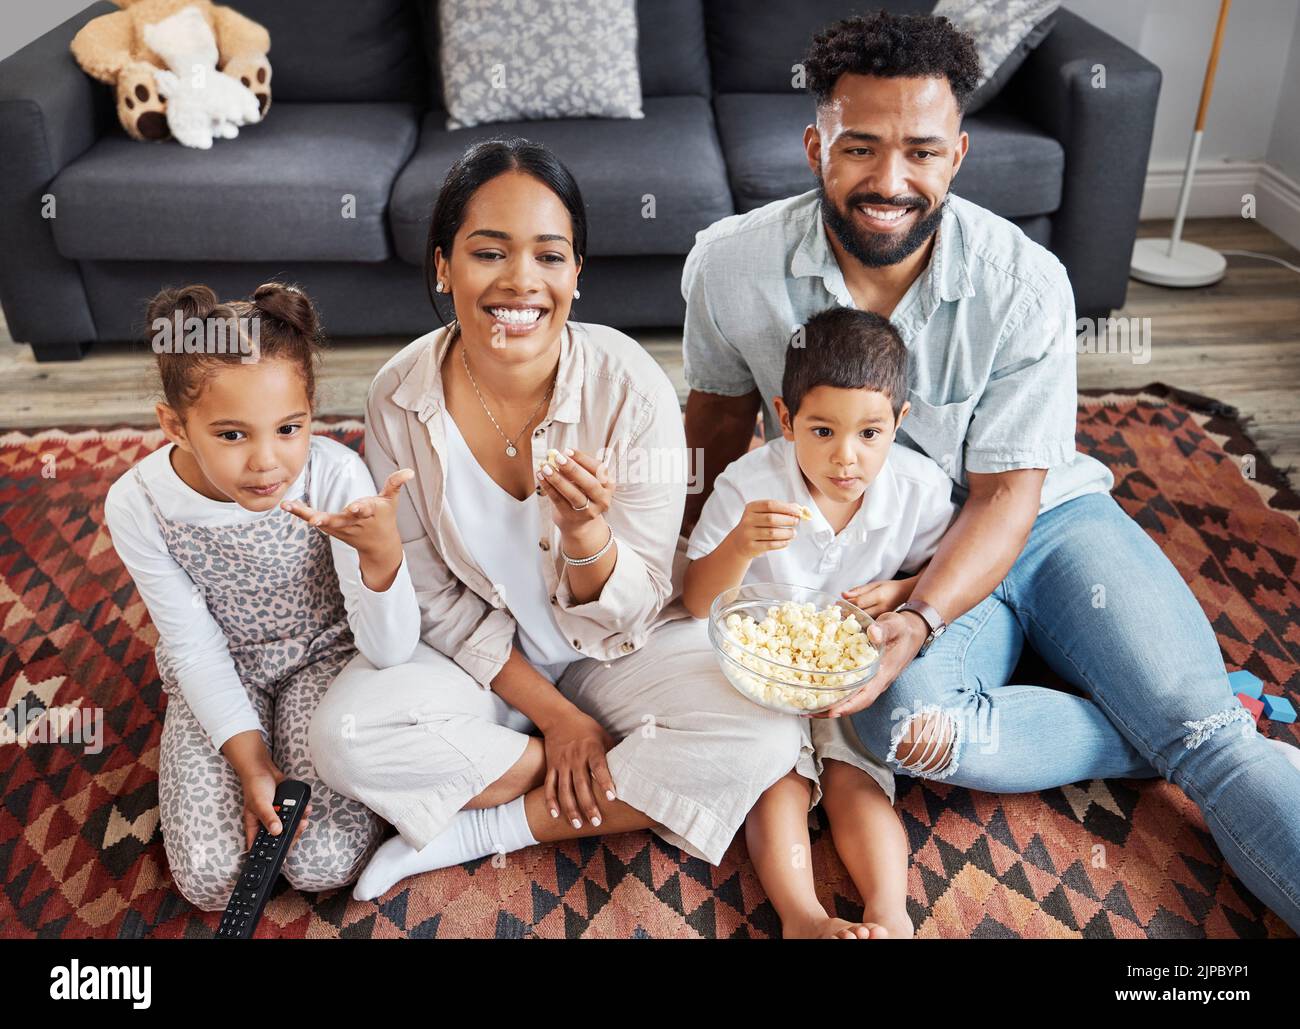 Watching movie, family bonding and eating popcorn while relaxing in the lounge together at home. Happy, smiling and carefree parents enjoying snack Stock Photo